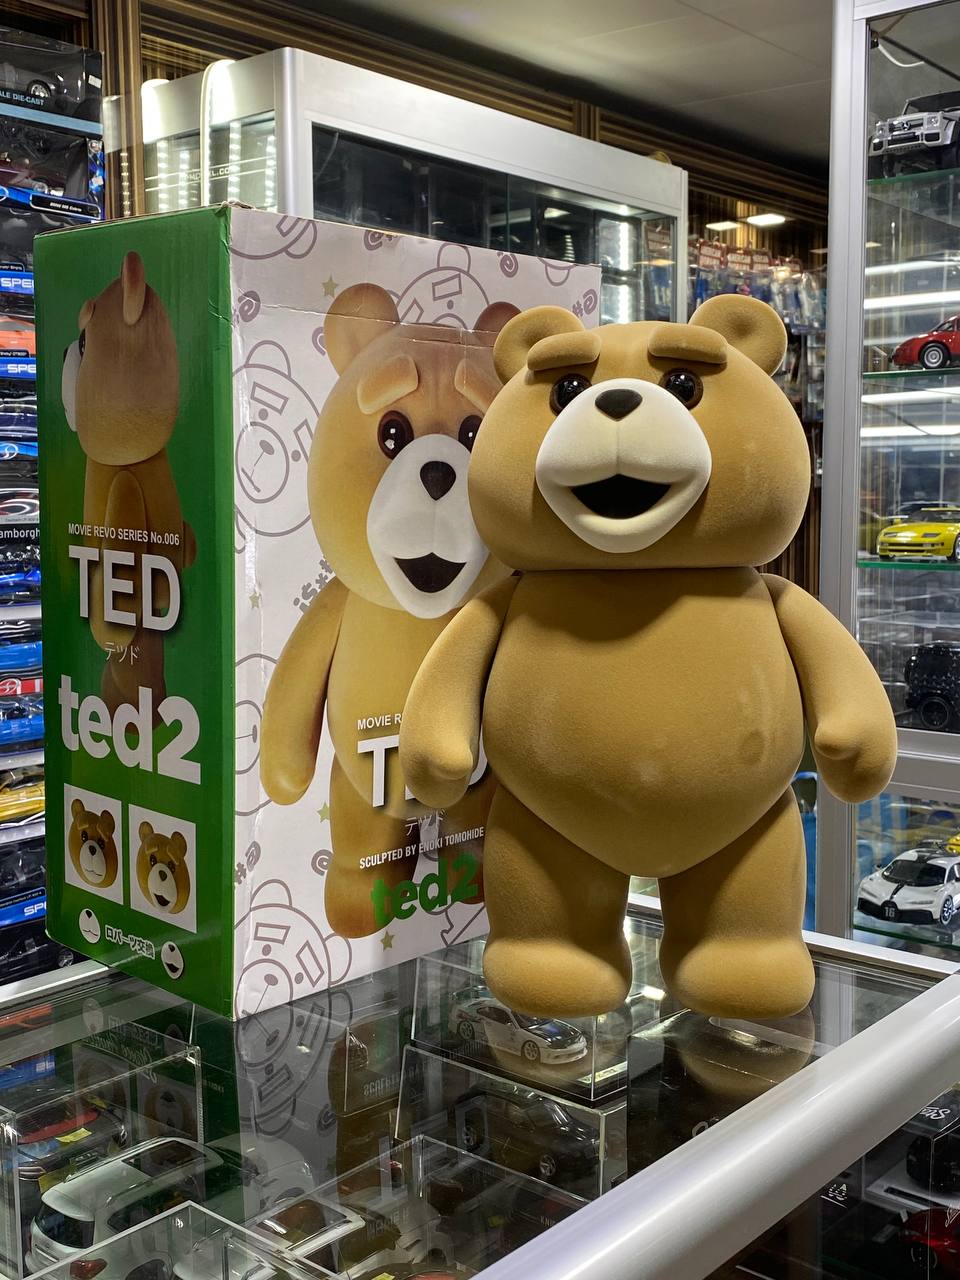 Ted (ted2)